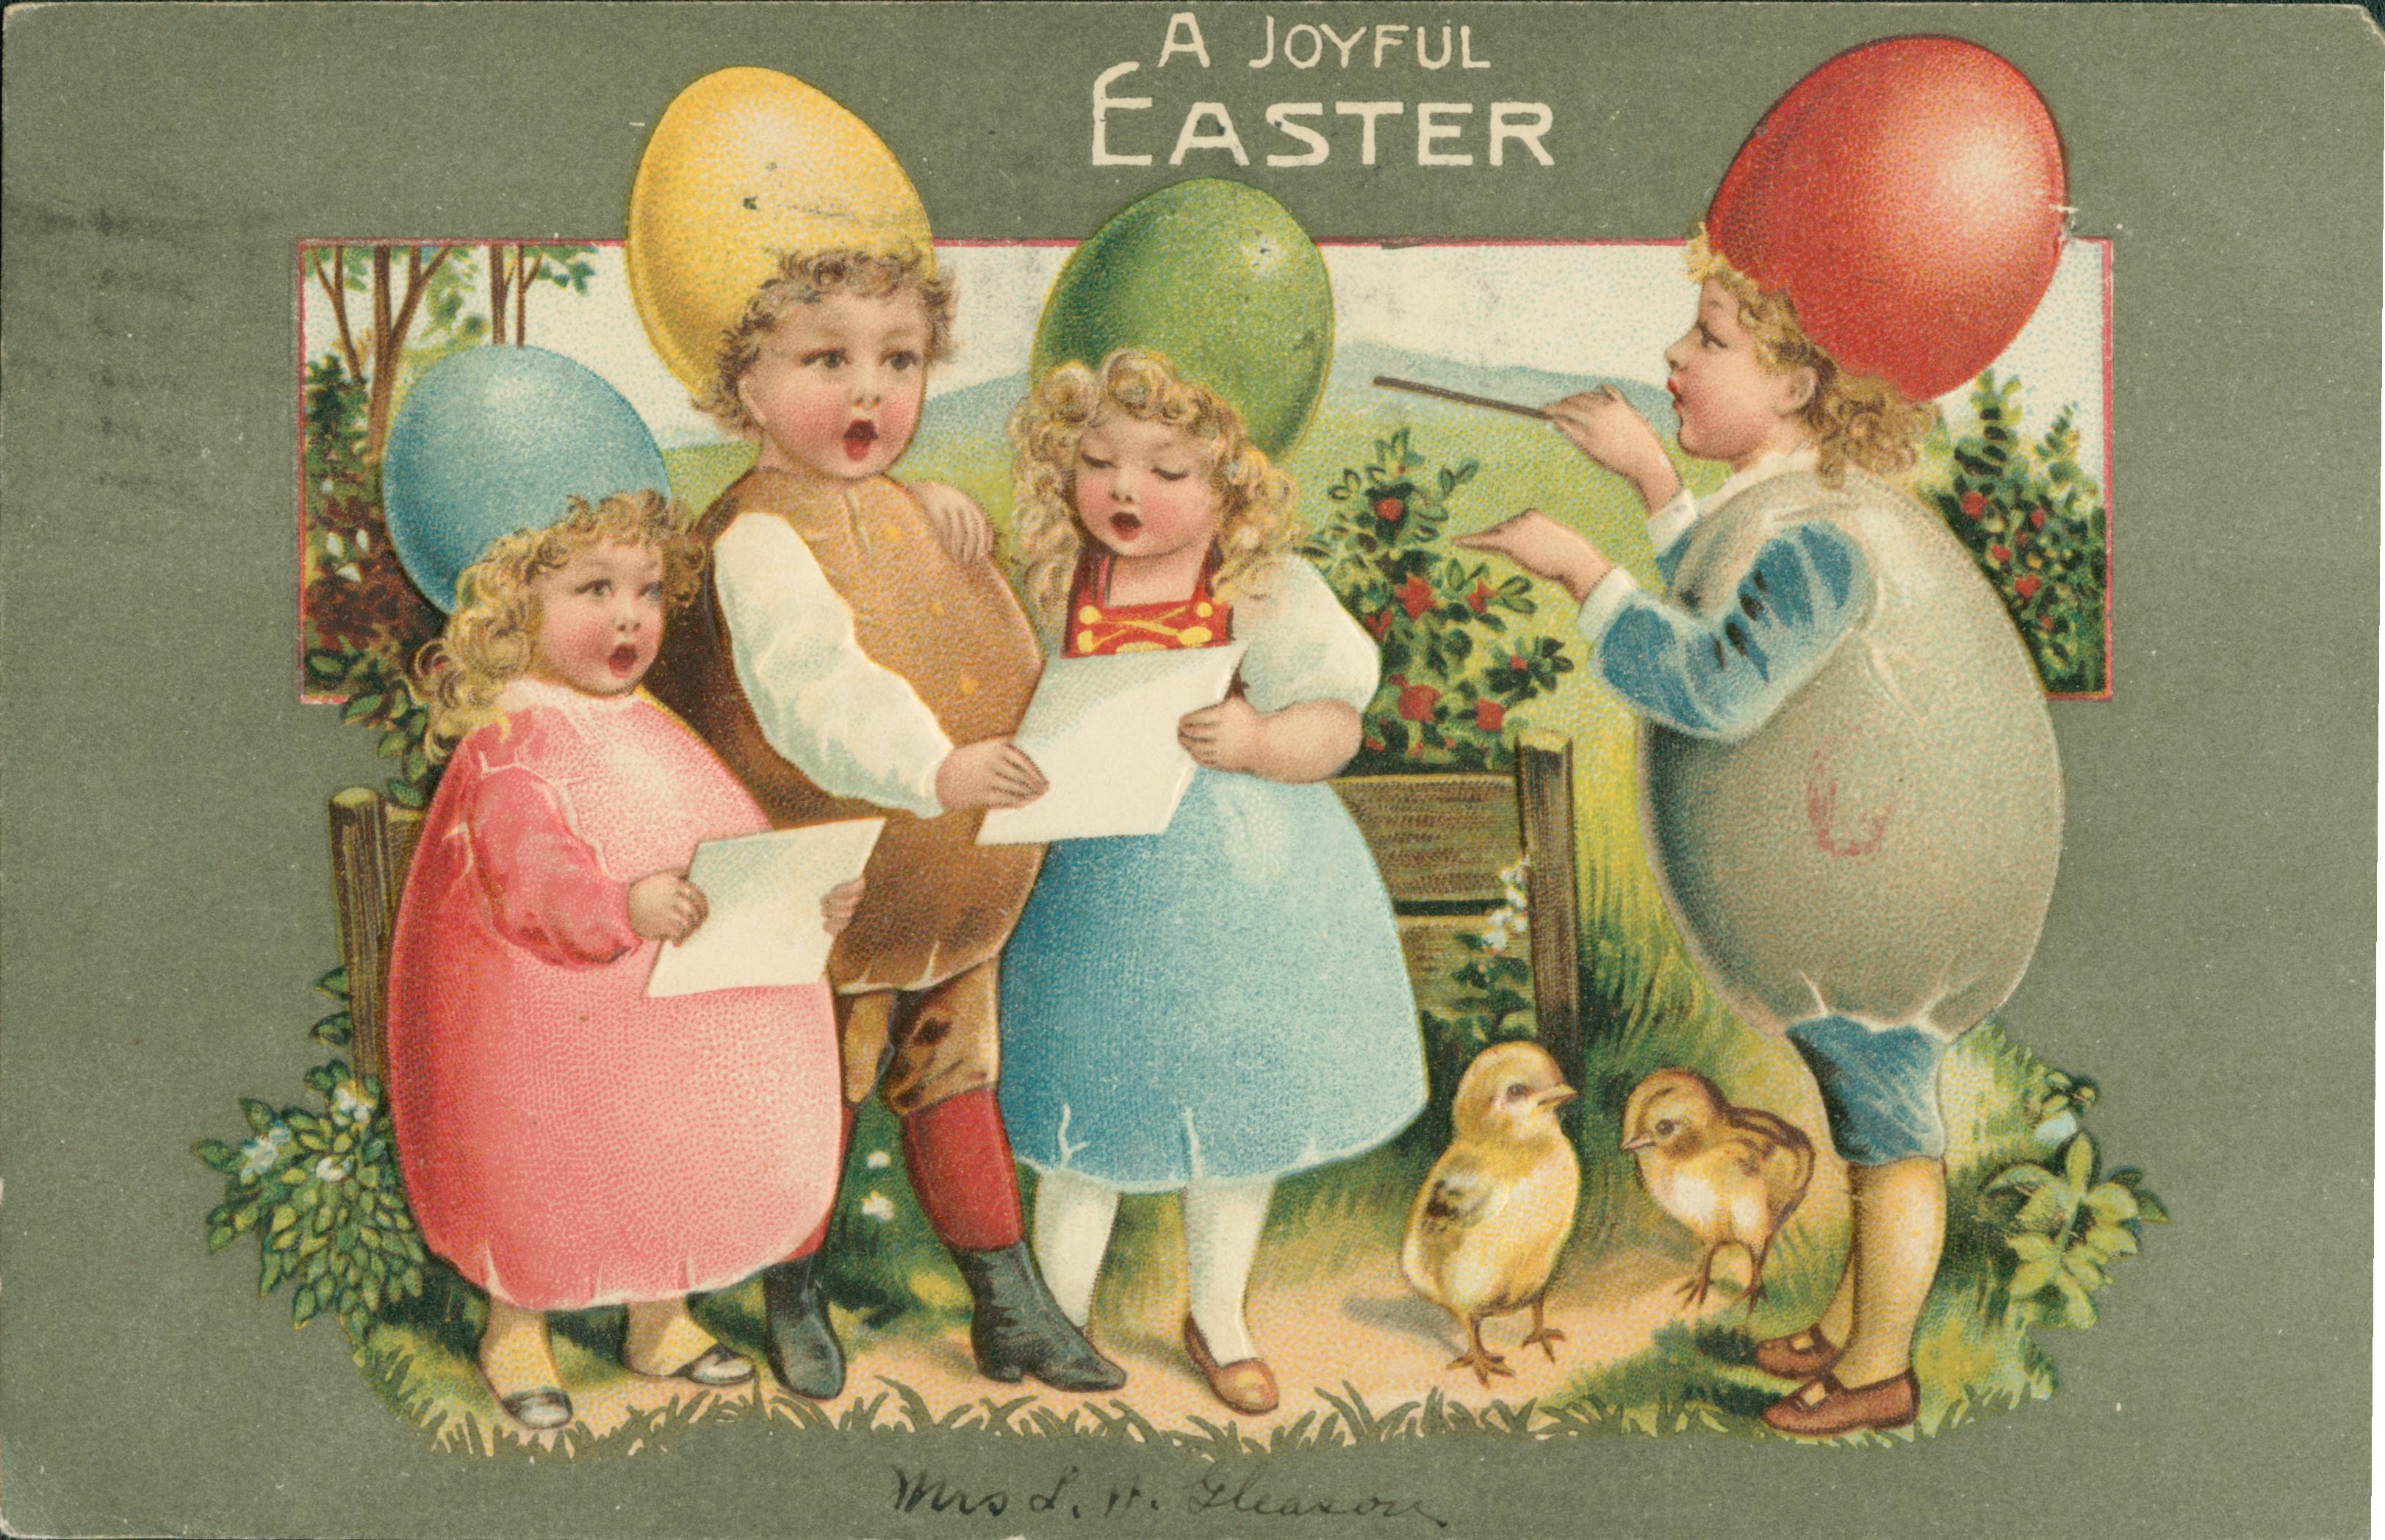 A group of four children dressed as colored eggs singing a song.